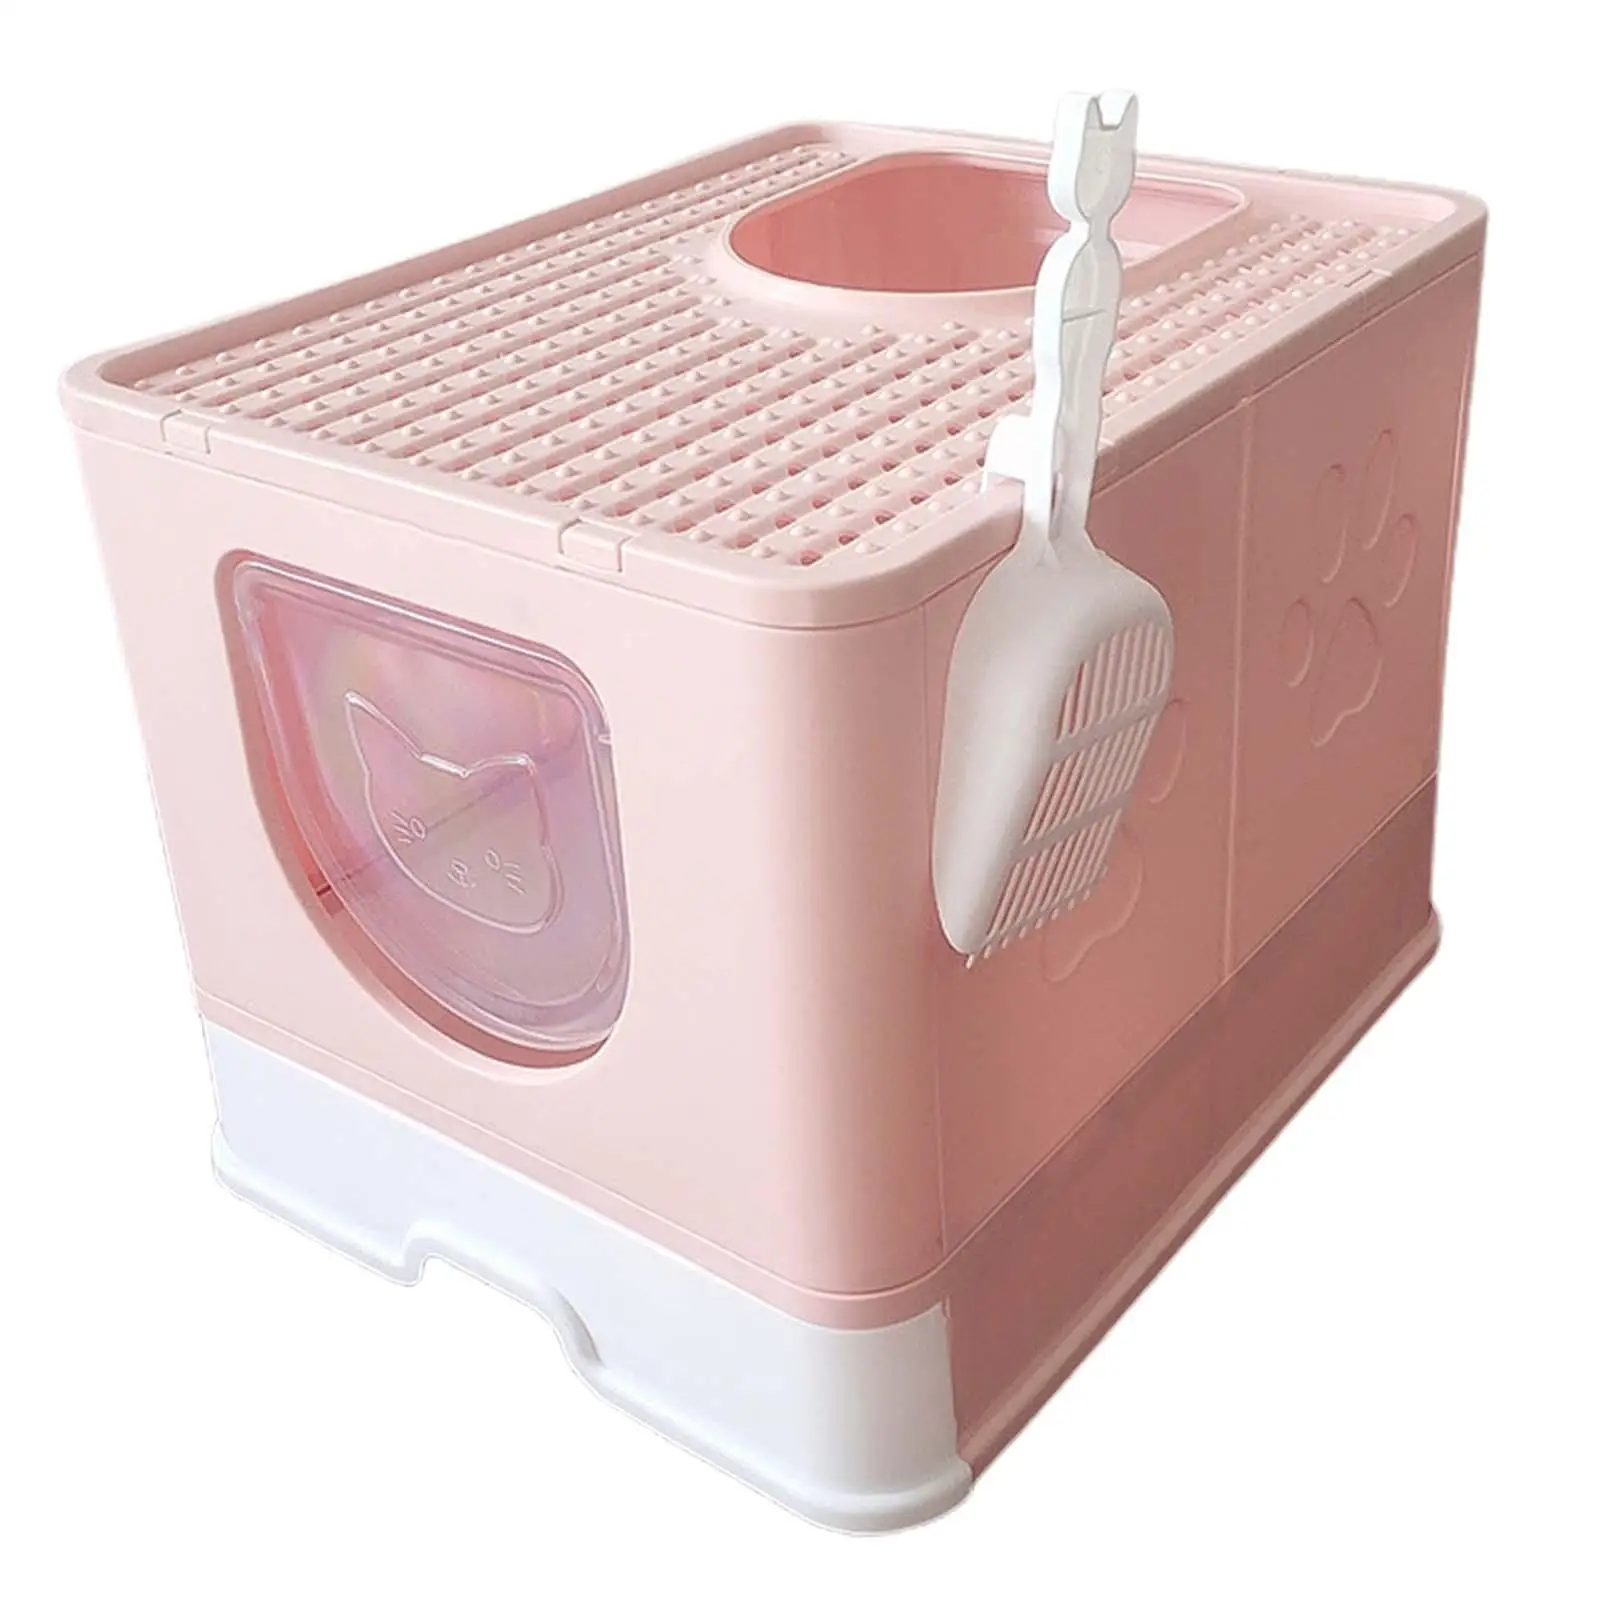 Hooded Cat Litter Box Enclosed Cat Toilet Kitty Litter Tray with Front Door Flap Durable Reusable Removable Pet Litter Box